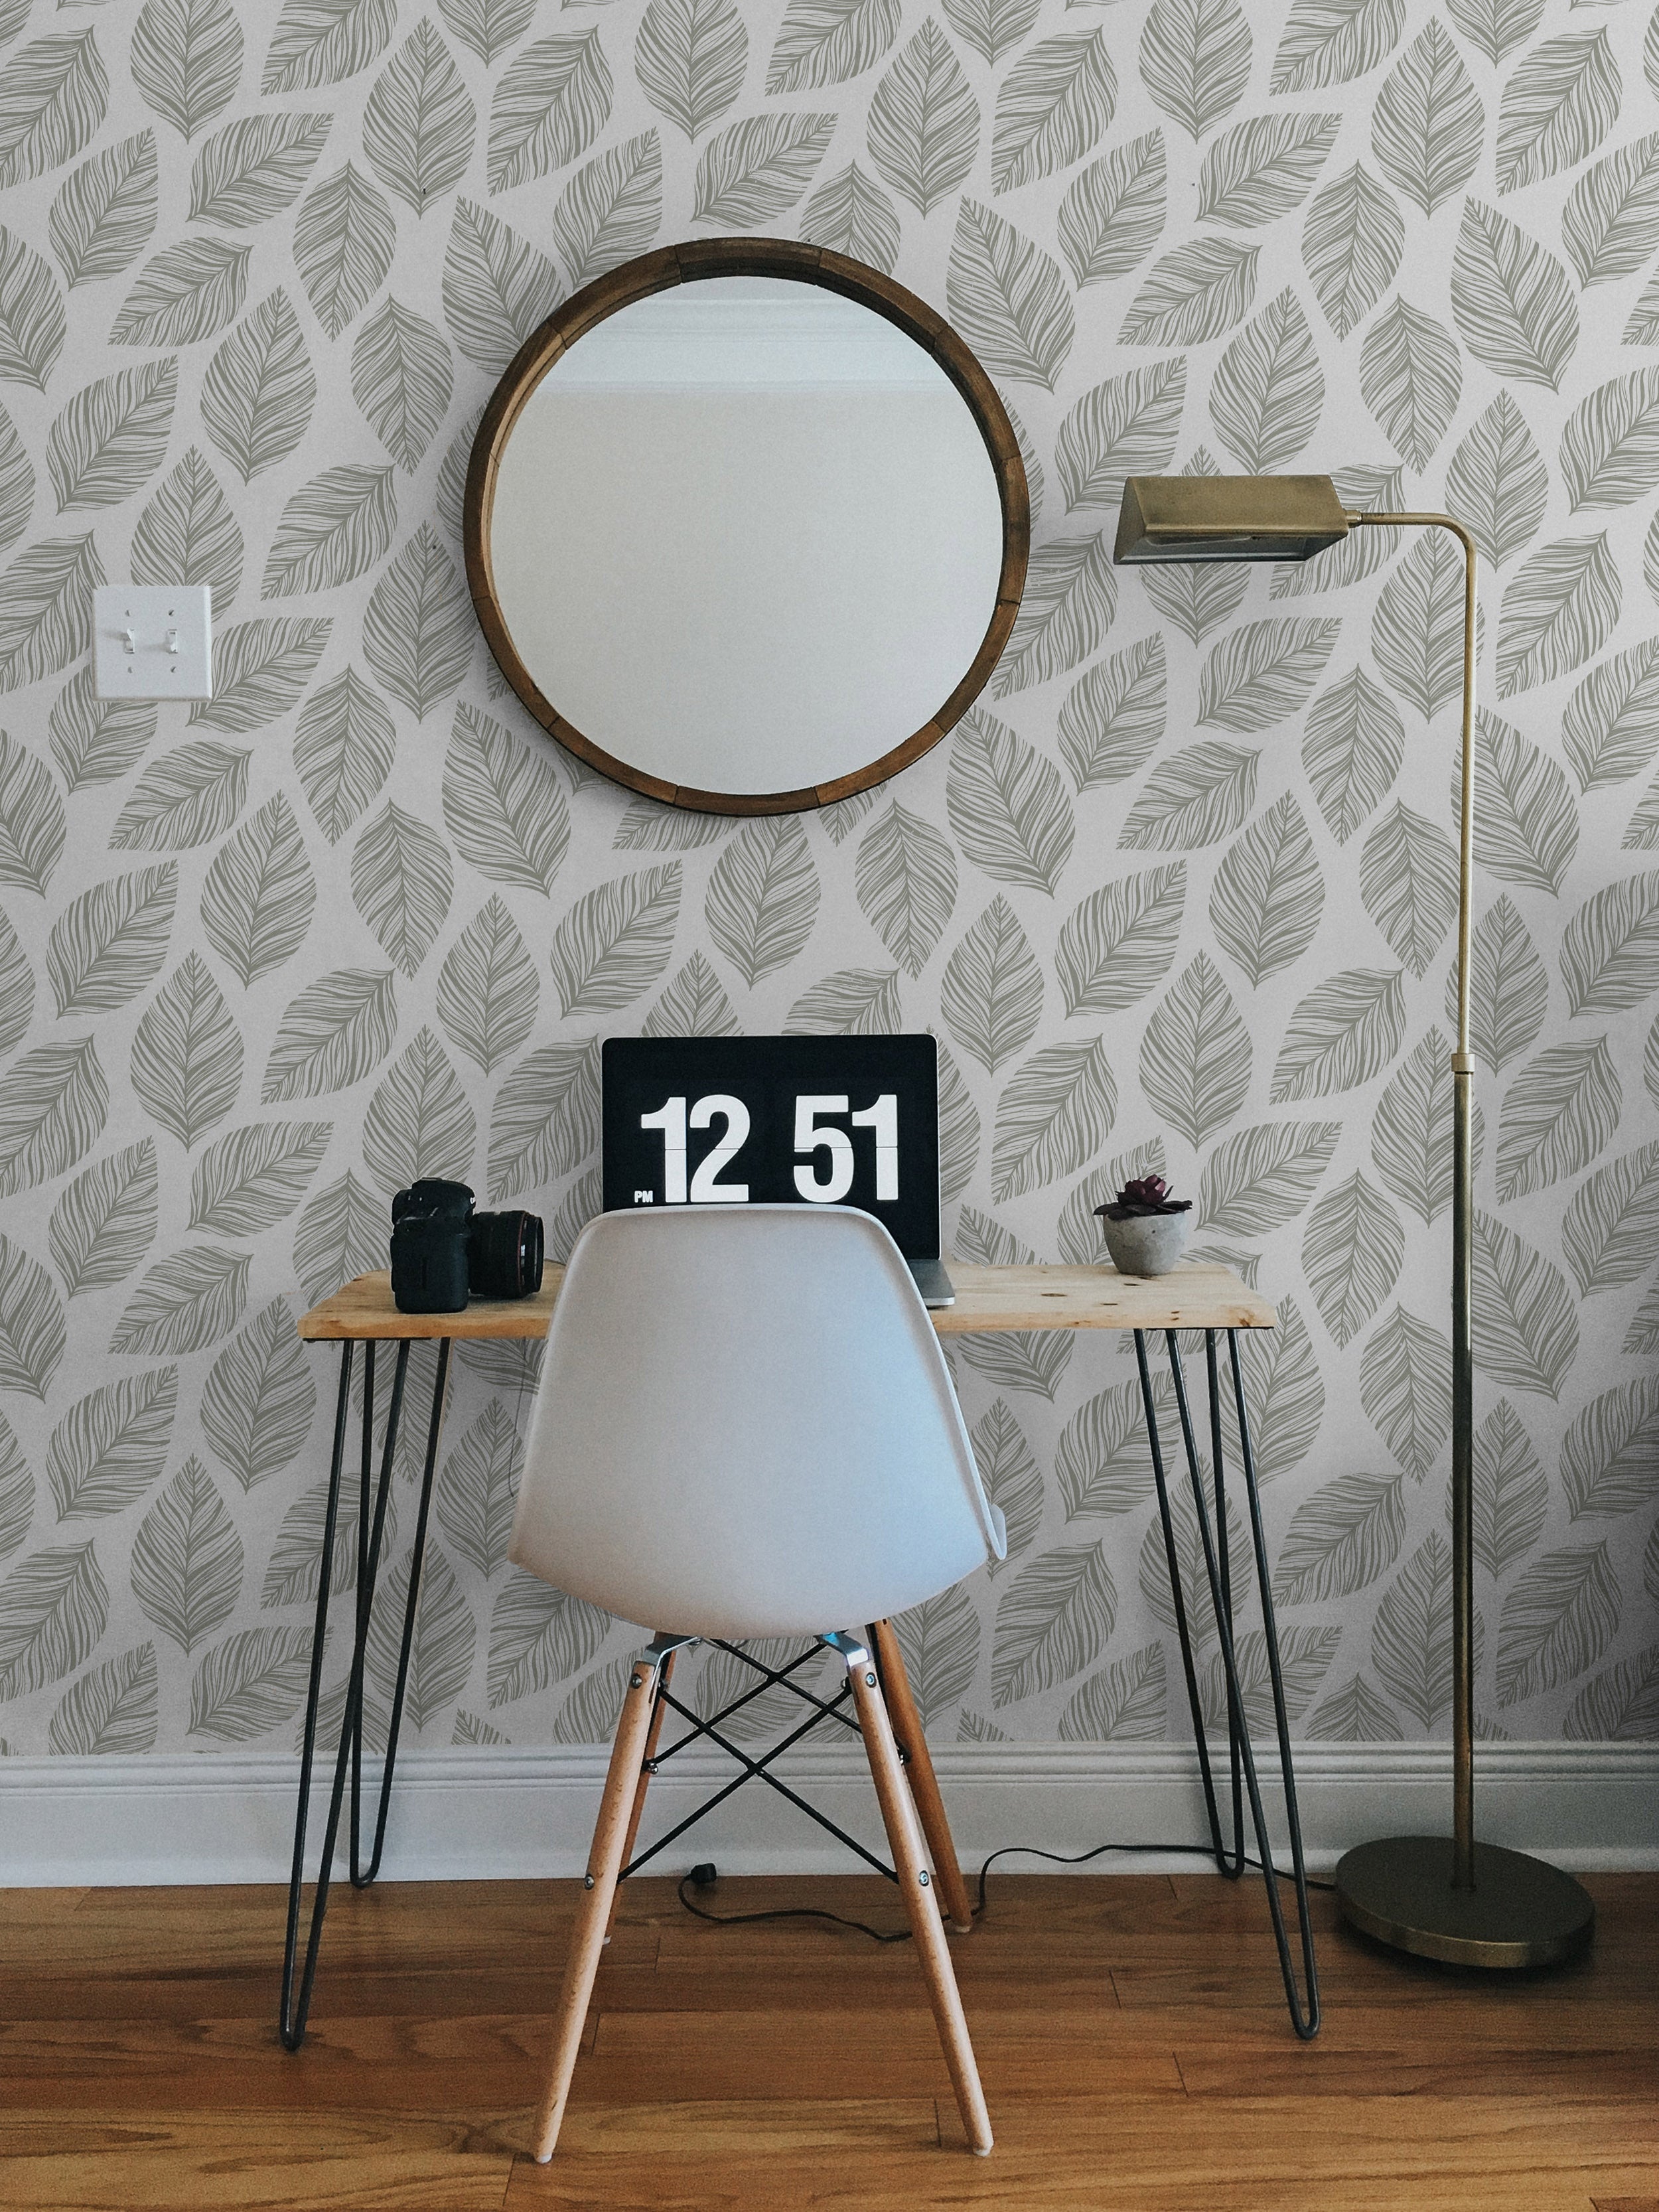 A modern home office setup with a minimalistic desk and chair against a wall adorned with Leafy Wallpaper, featuring an elegant pattern of grey leaf outlines on a white background, enhancing the space with a fresh, botanical vibe.